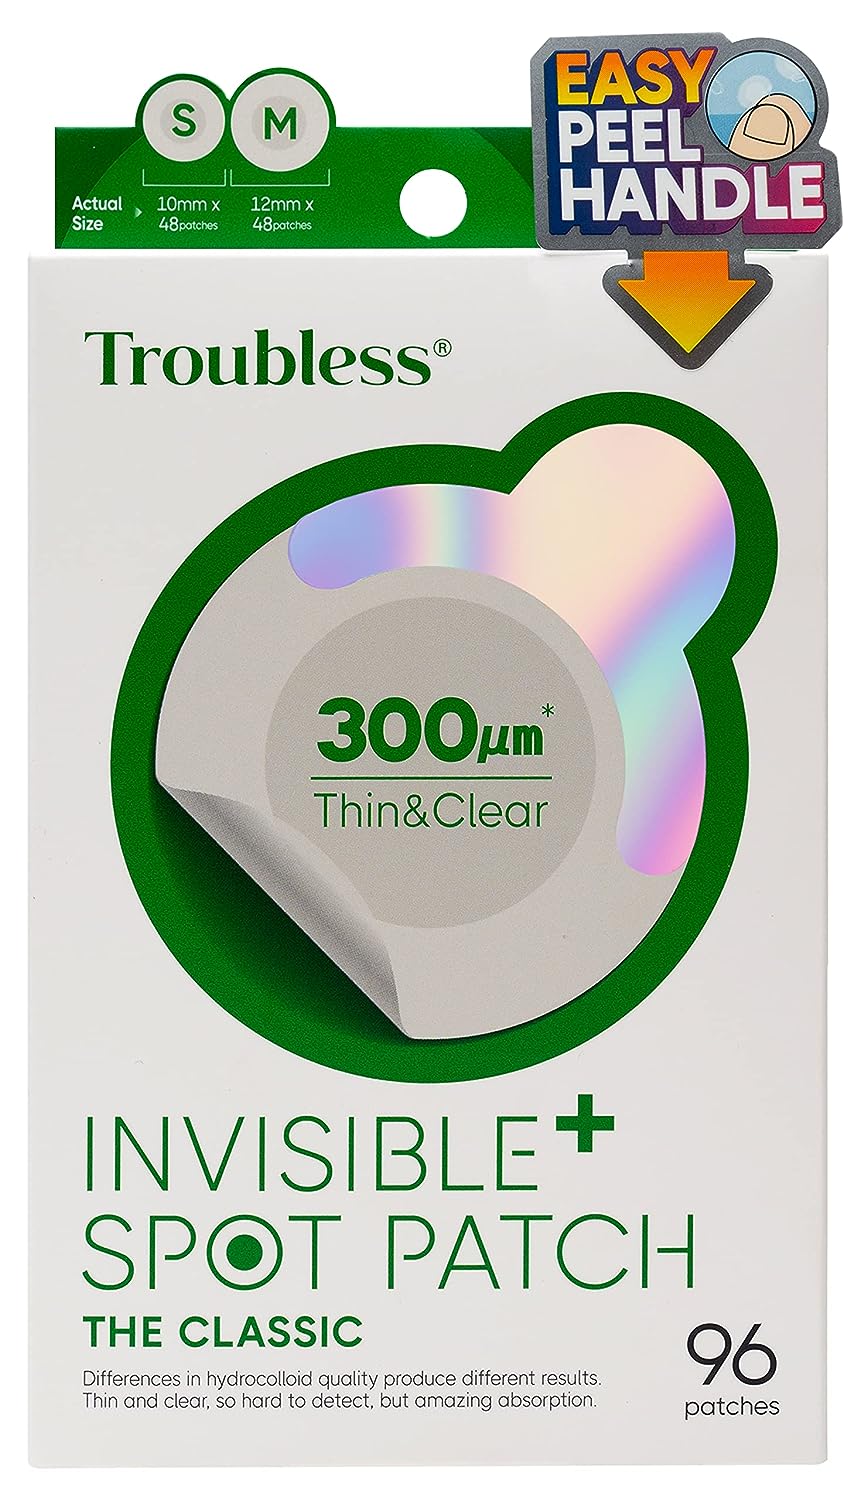 Troubless Invisible Pimple Spot Patch - The Classic